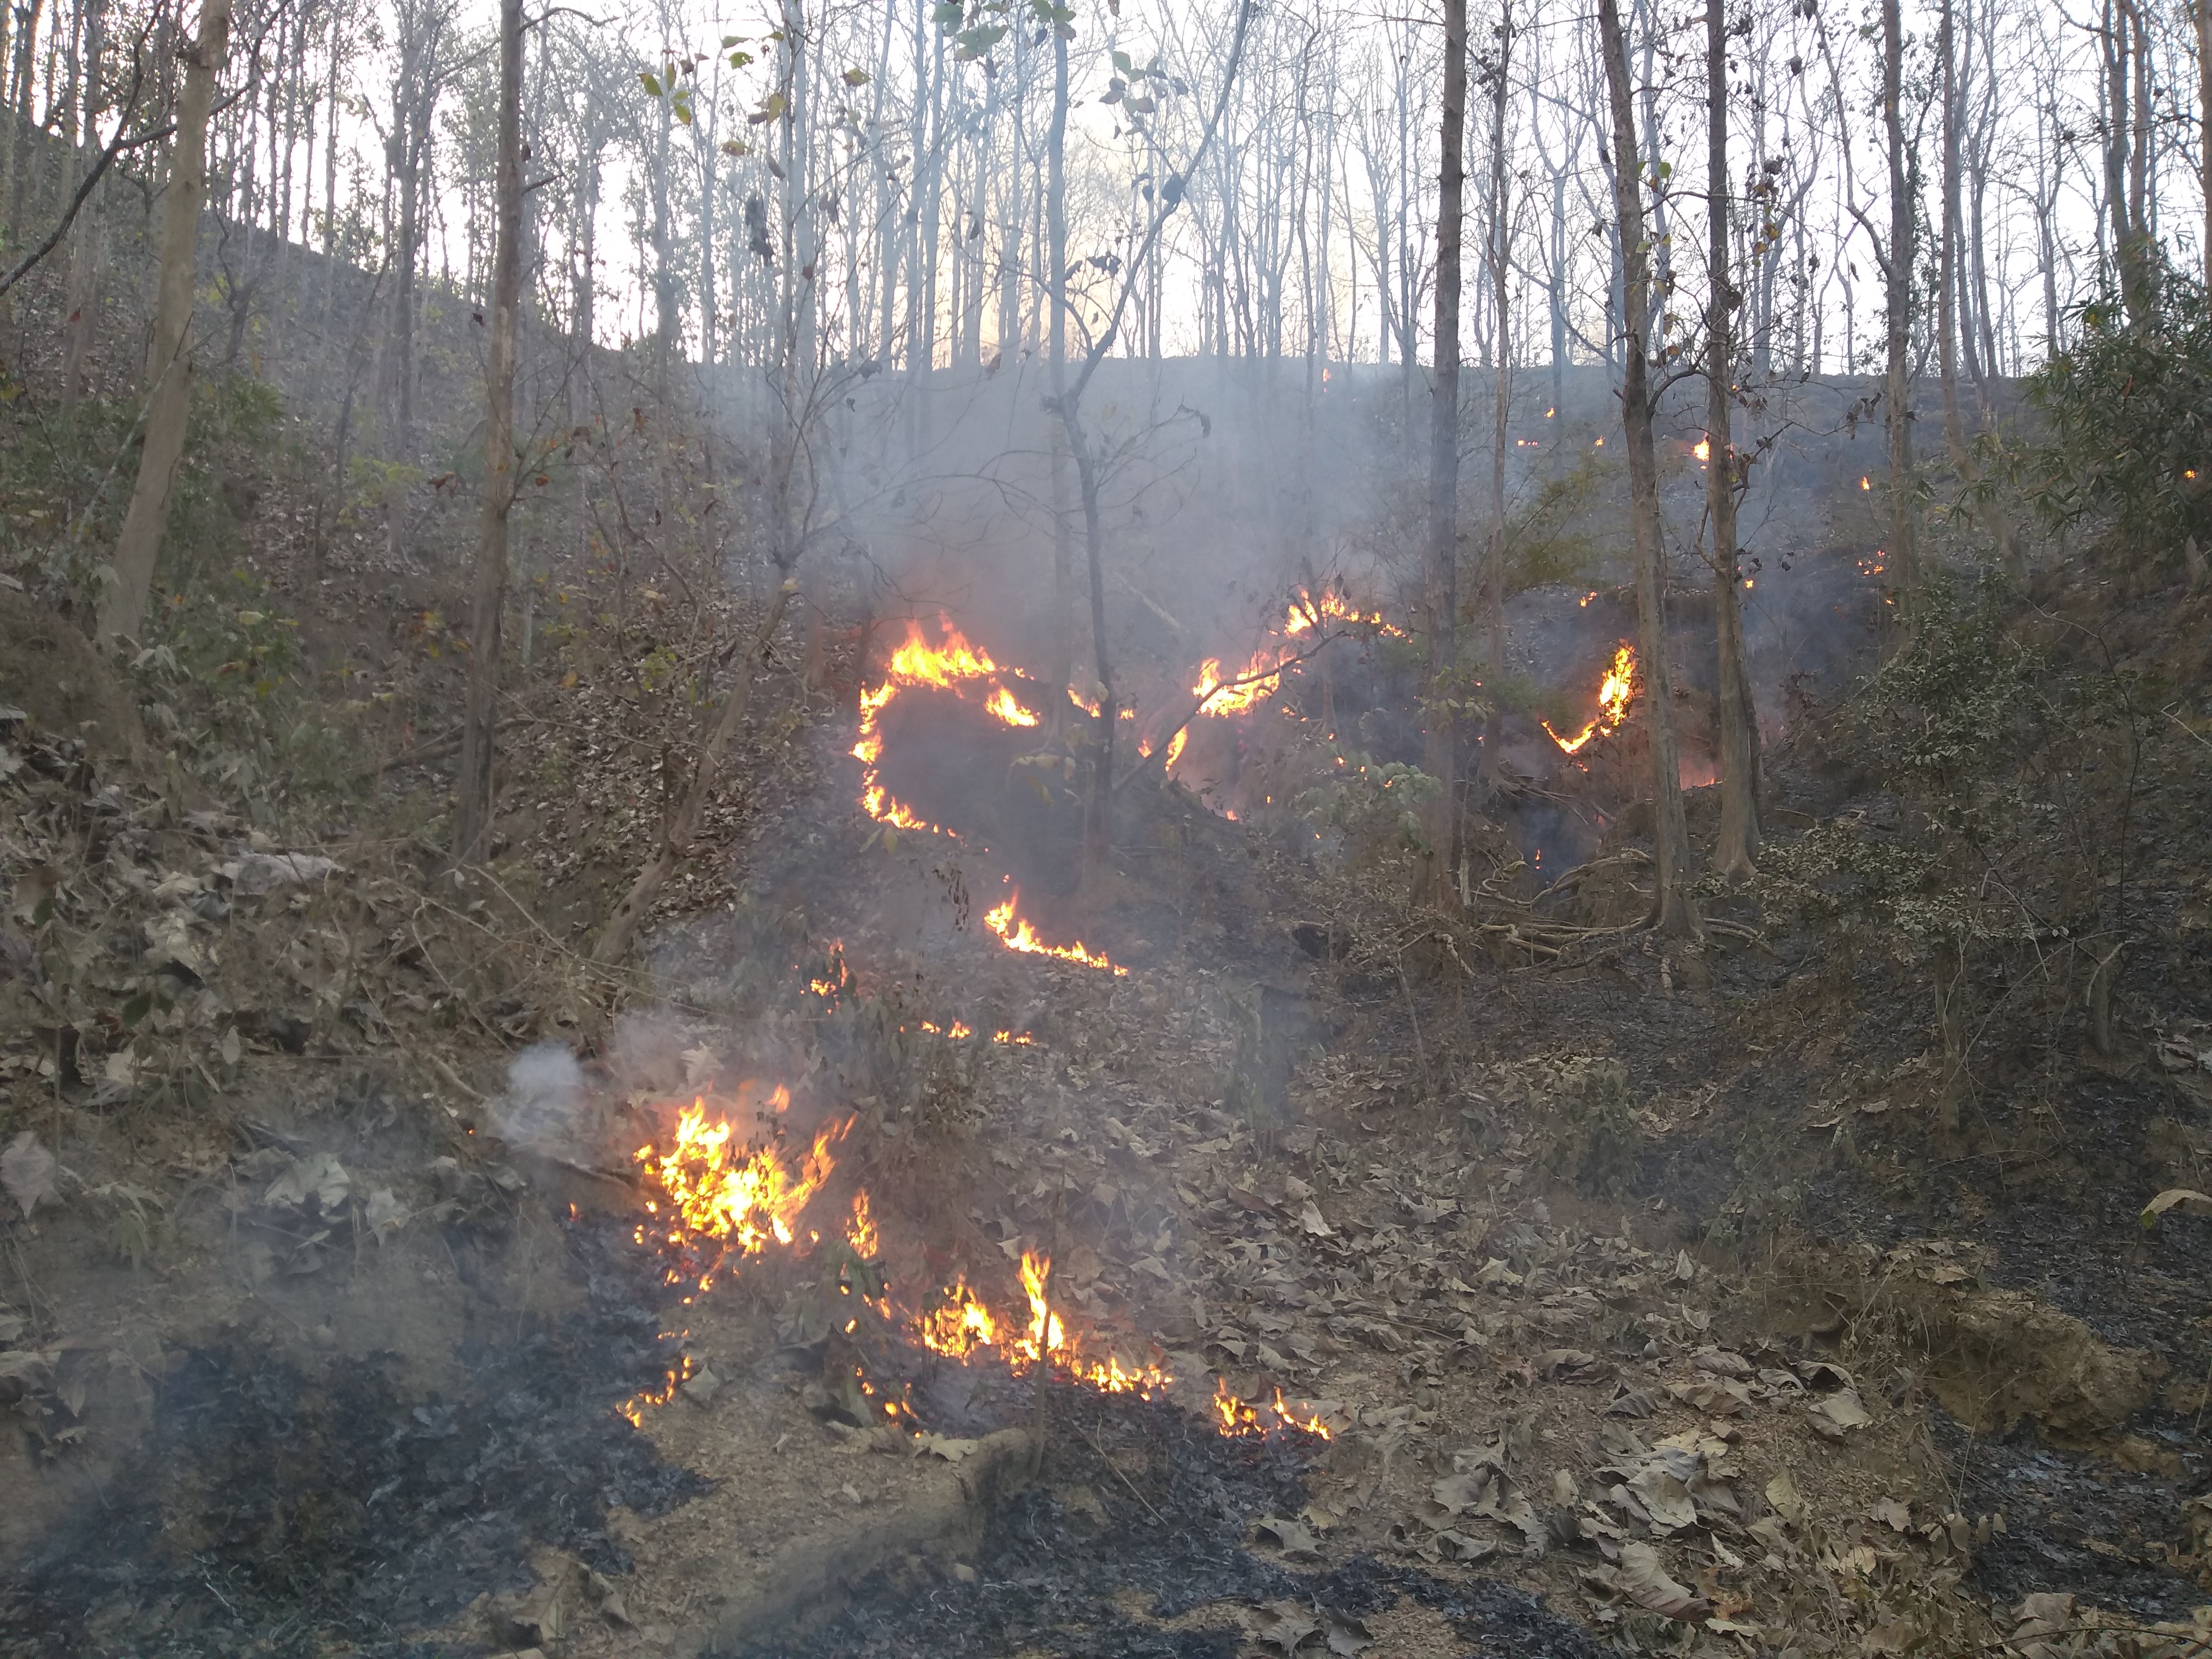 Wildfire at Karbook Forest Sub-Division, India- March 13, 2021